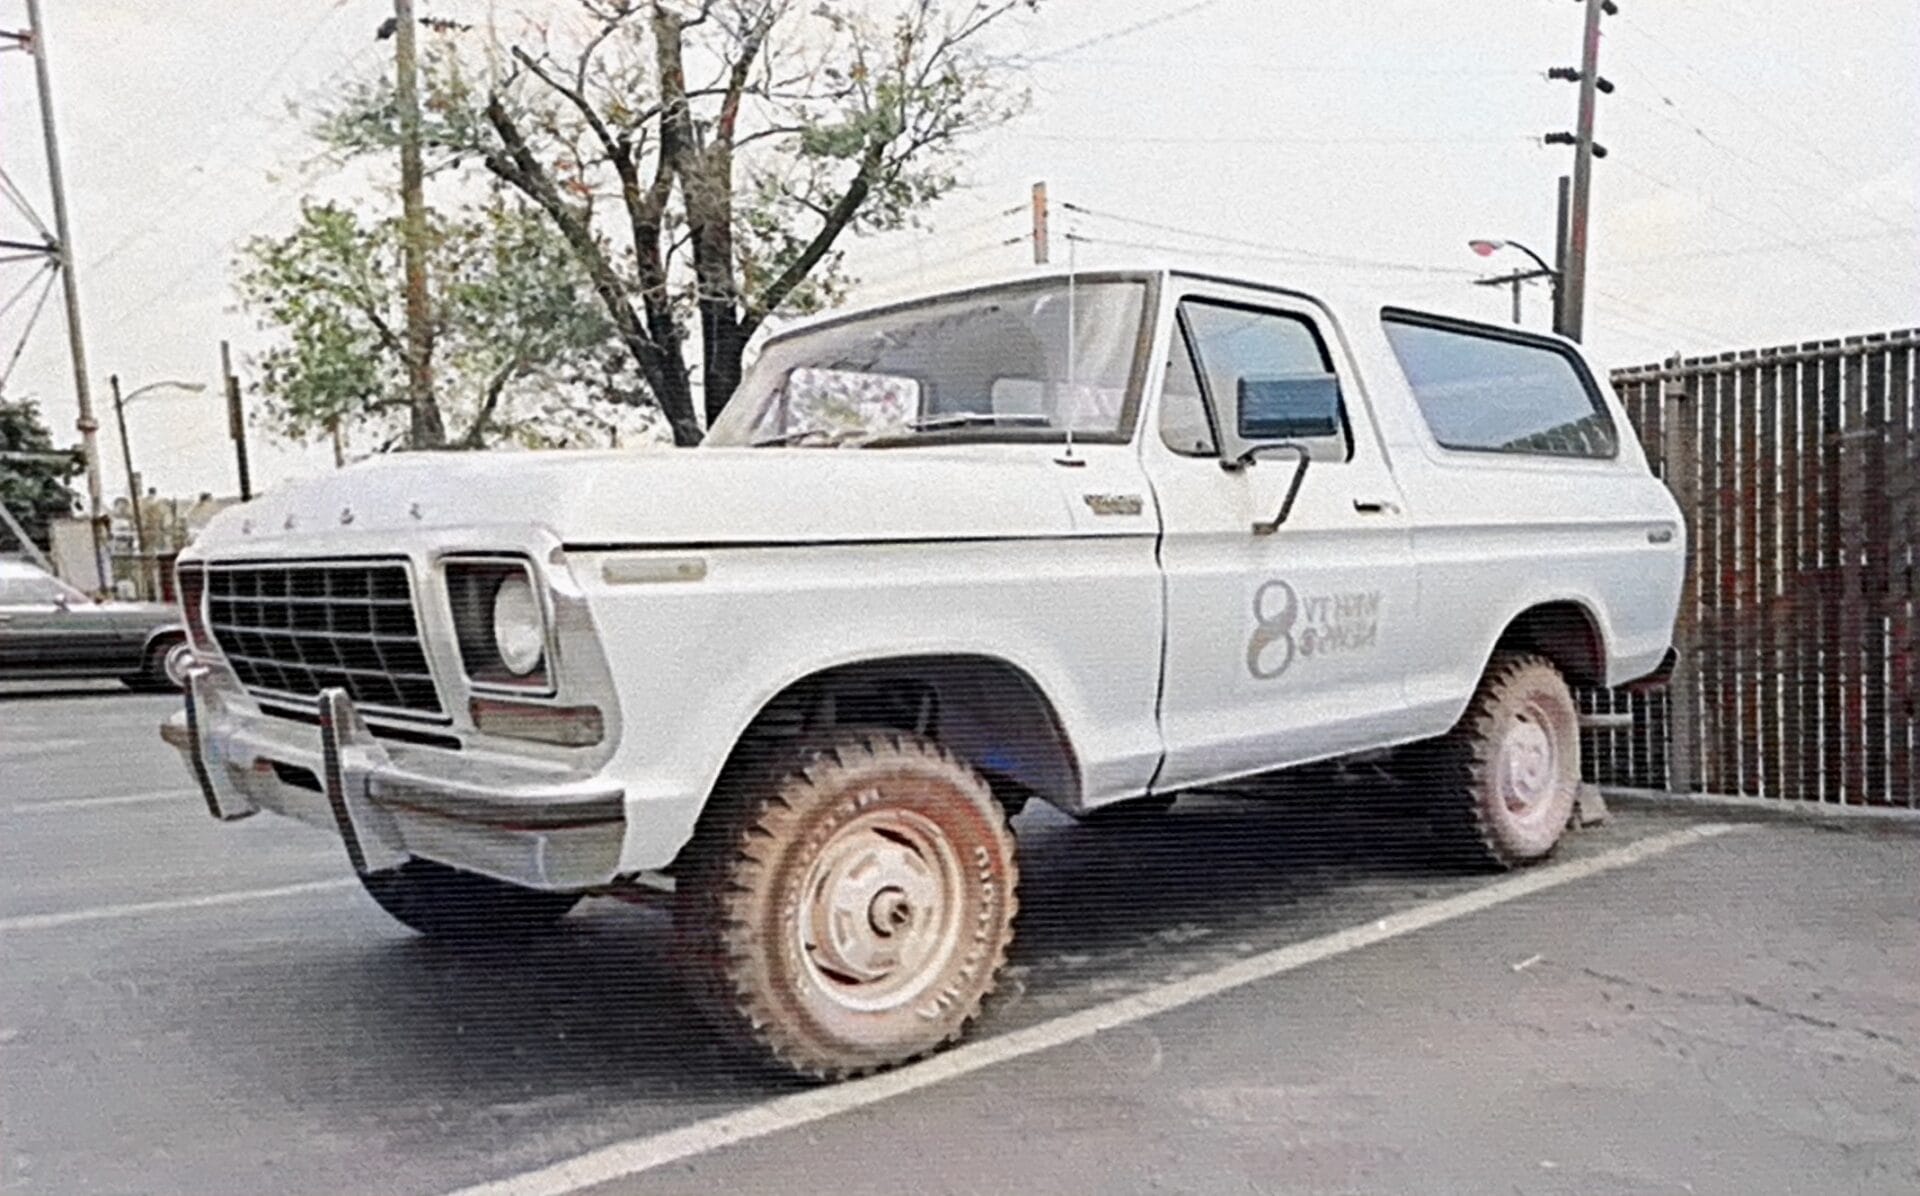 This Ford Bronco was used in the late 70s and early 80s.